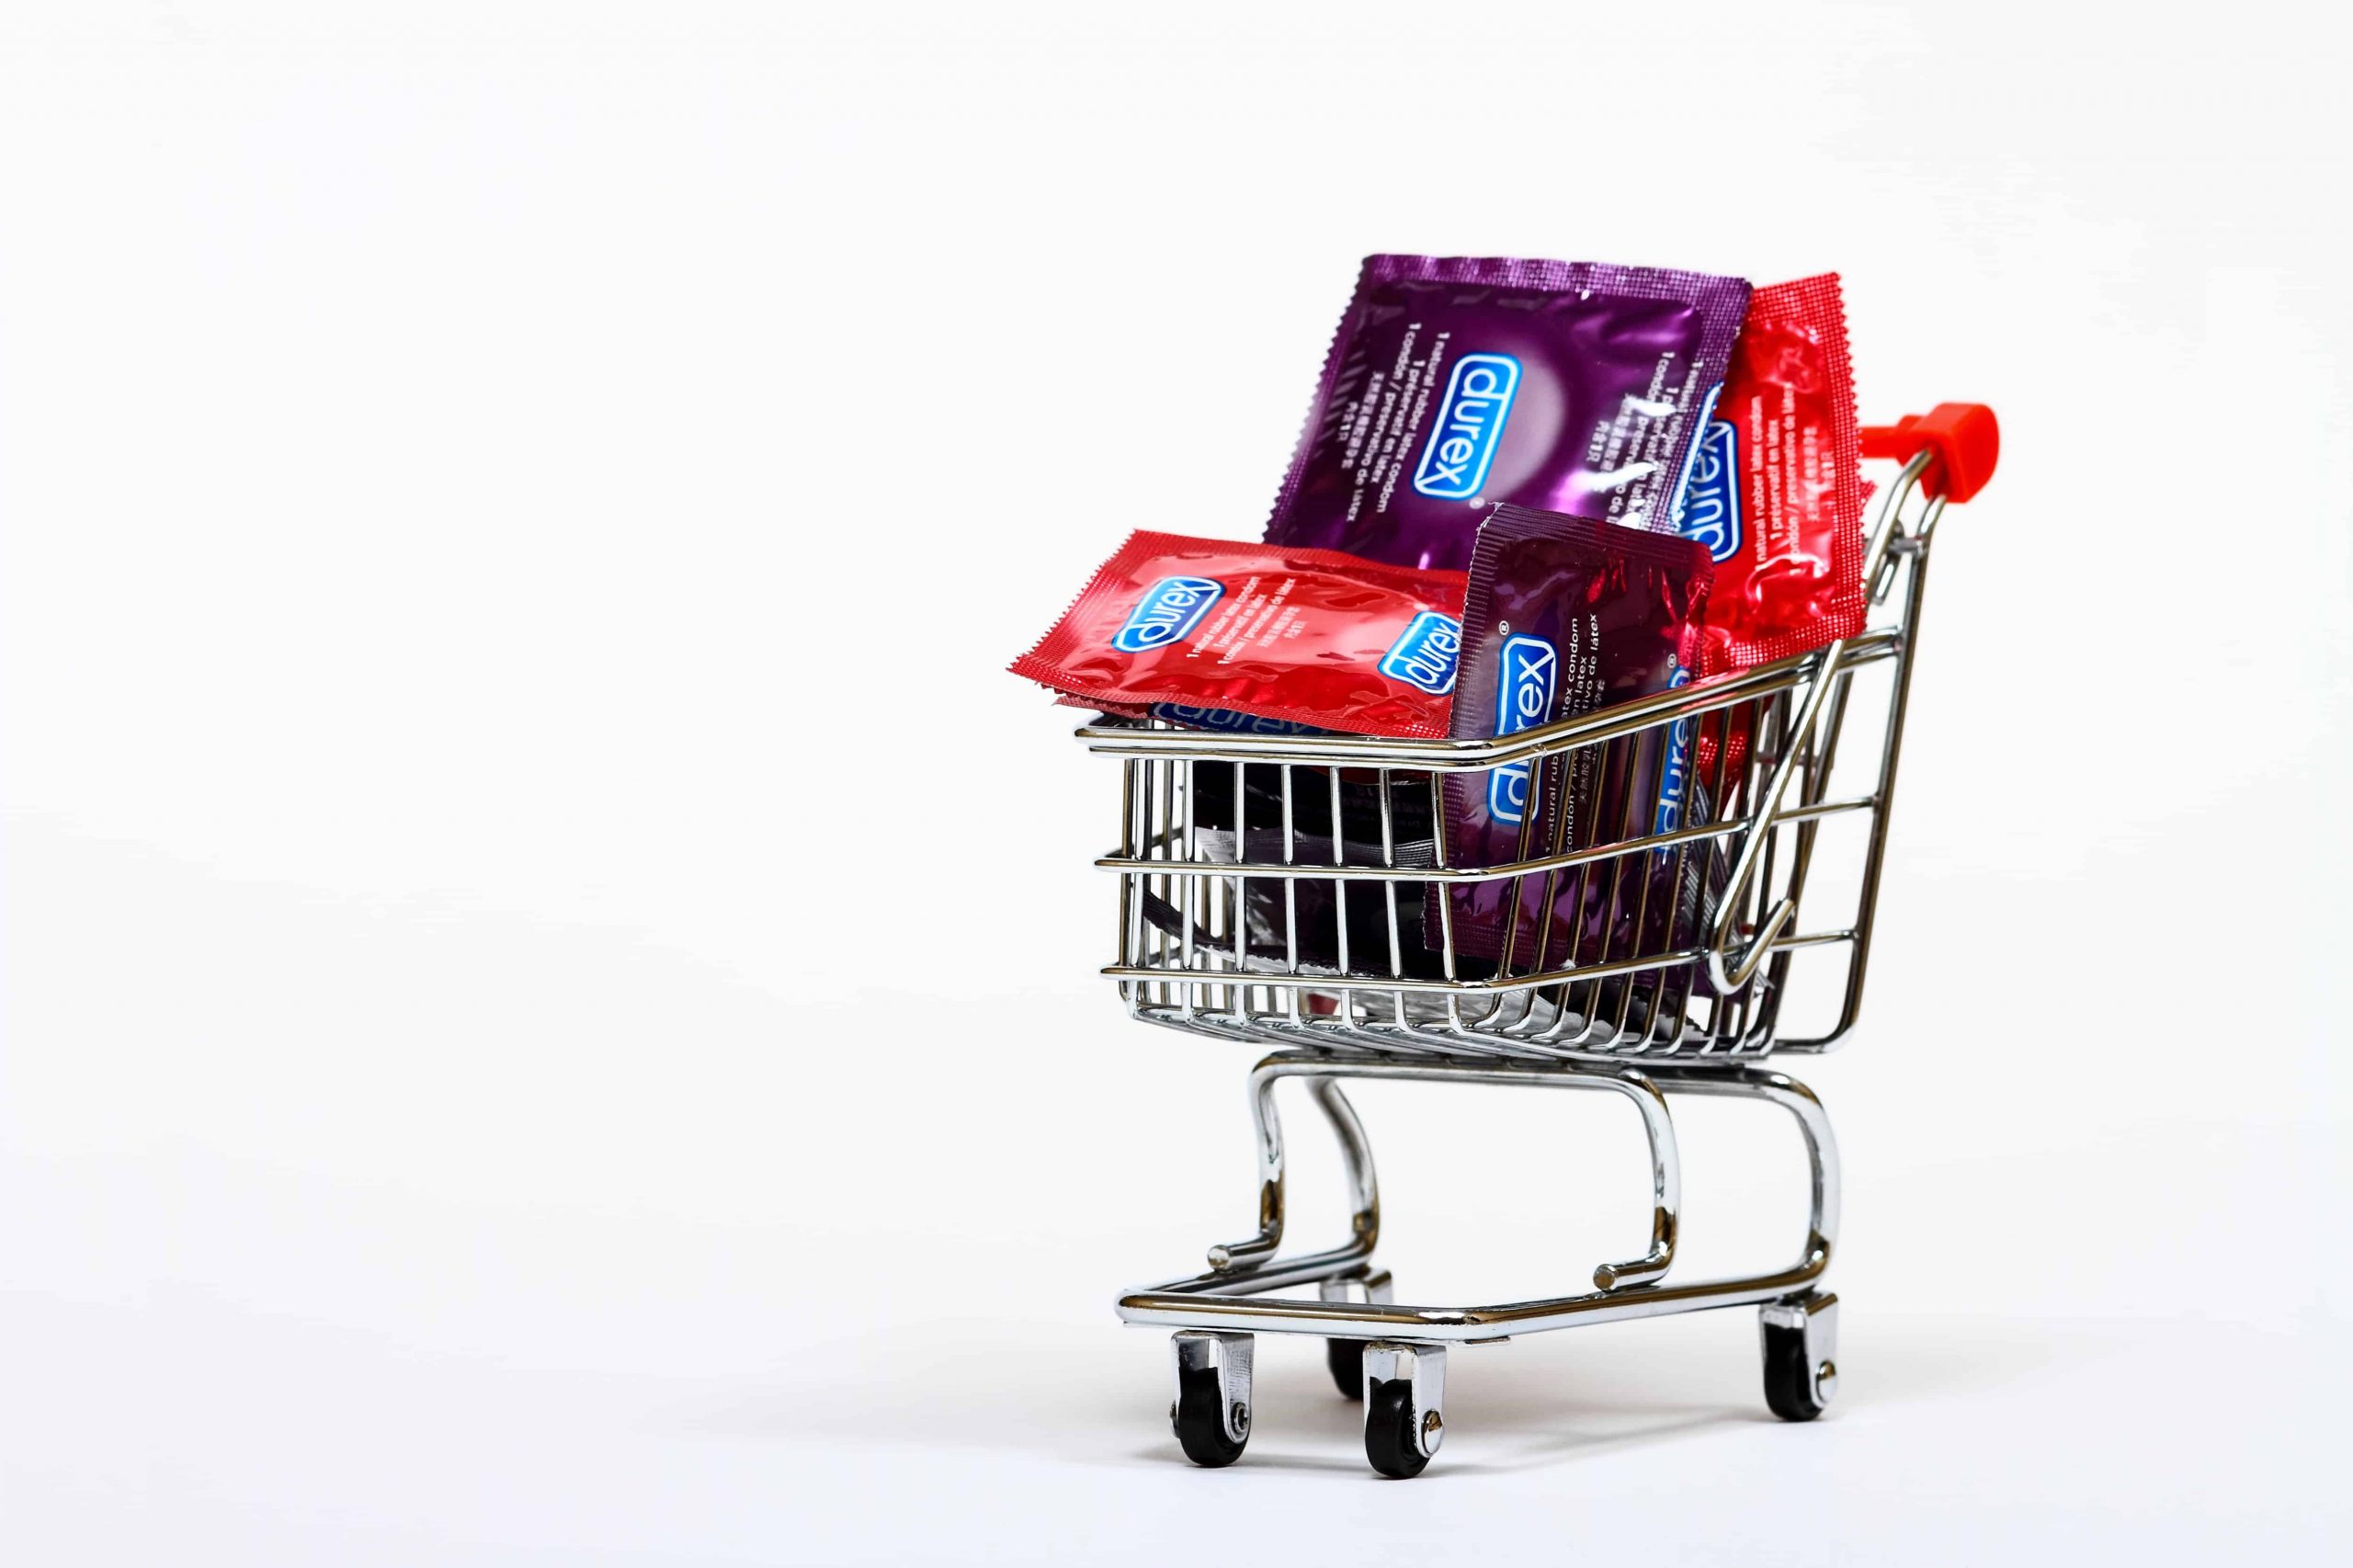 Shopping cart filled with condom packets